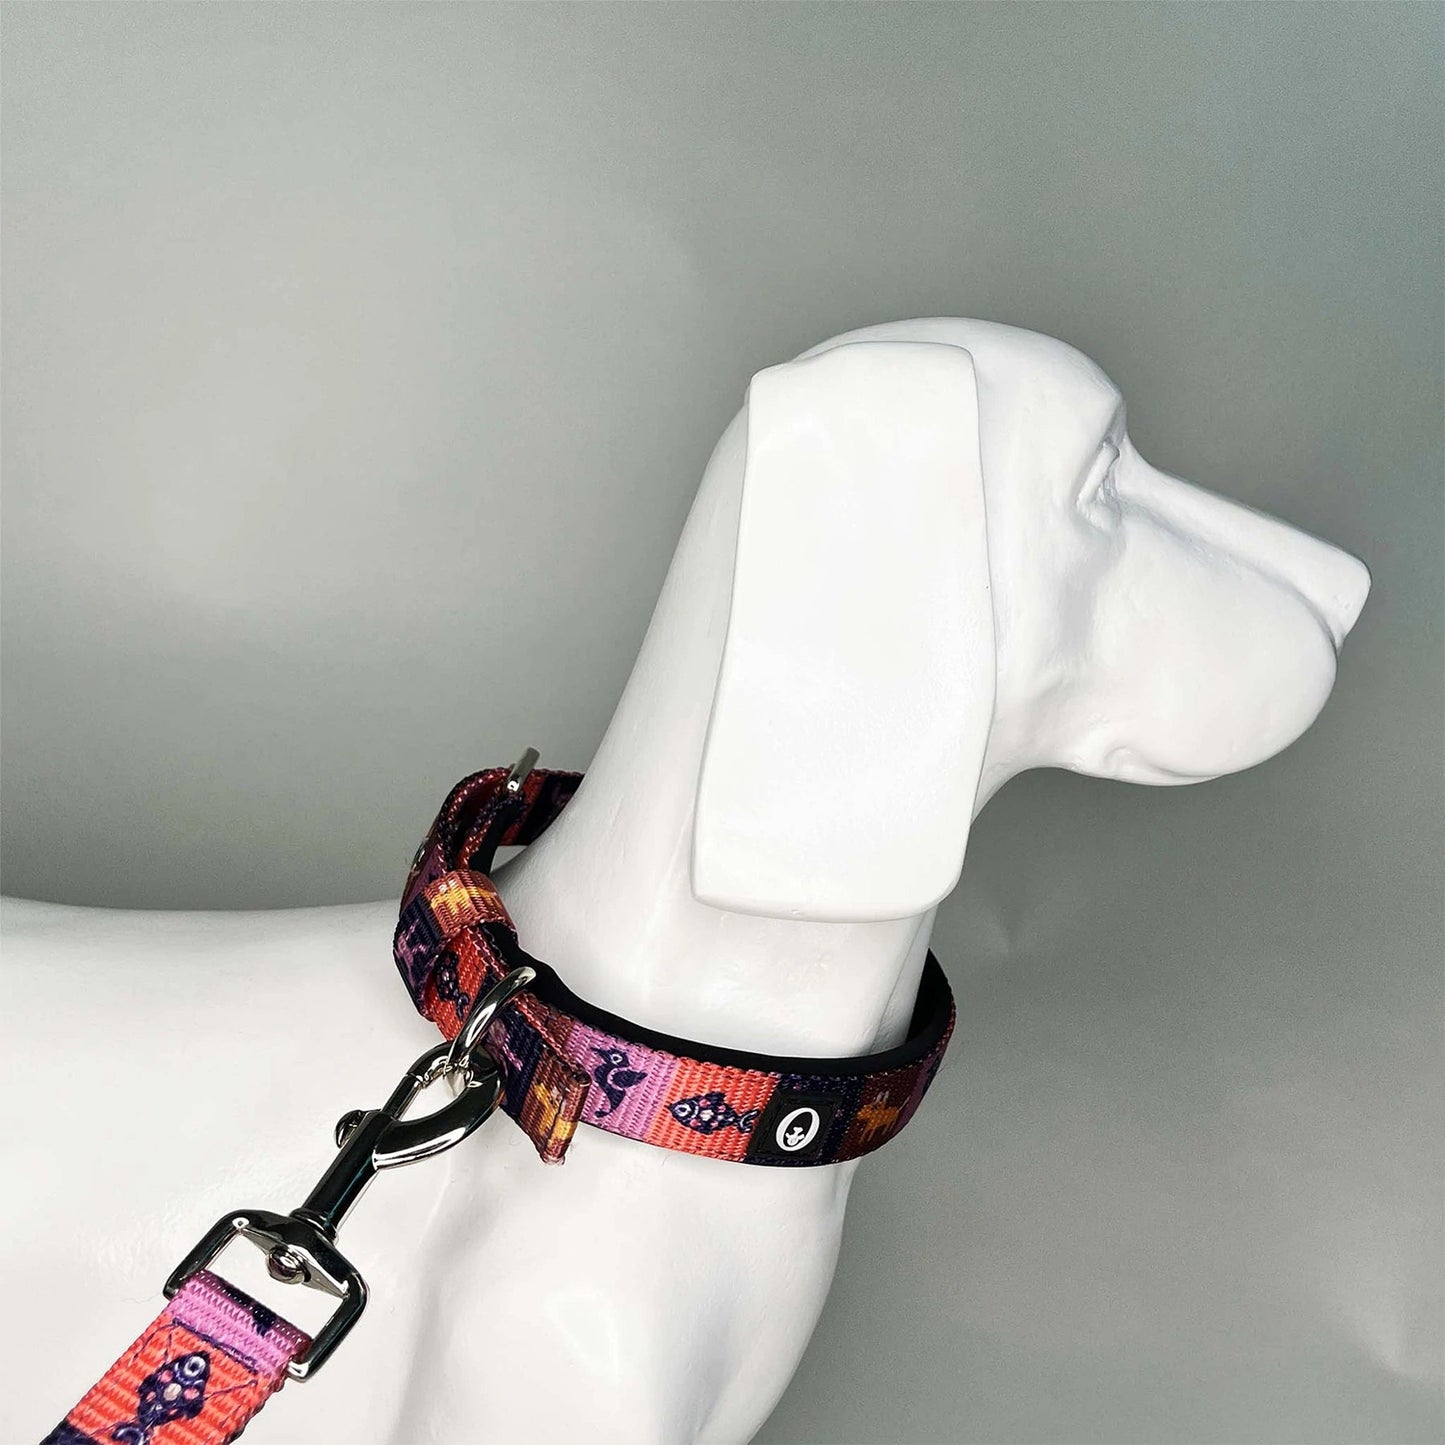 Forfurs - Zootopia Pin Buckle Collar with leashes For Dogs & Cats